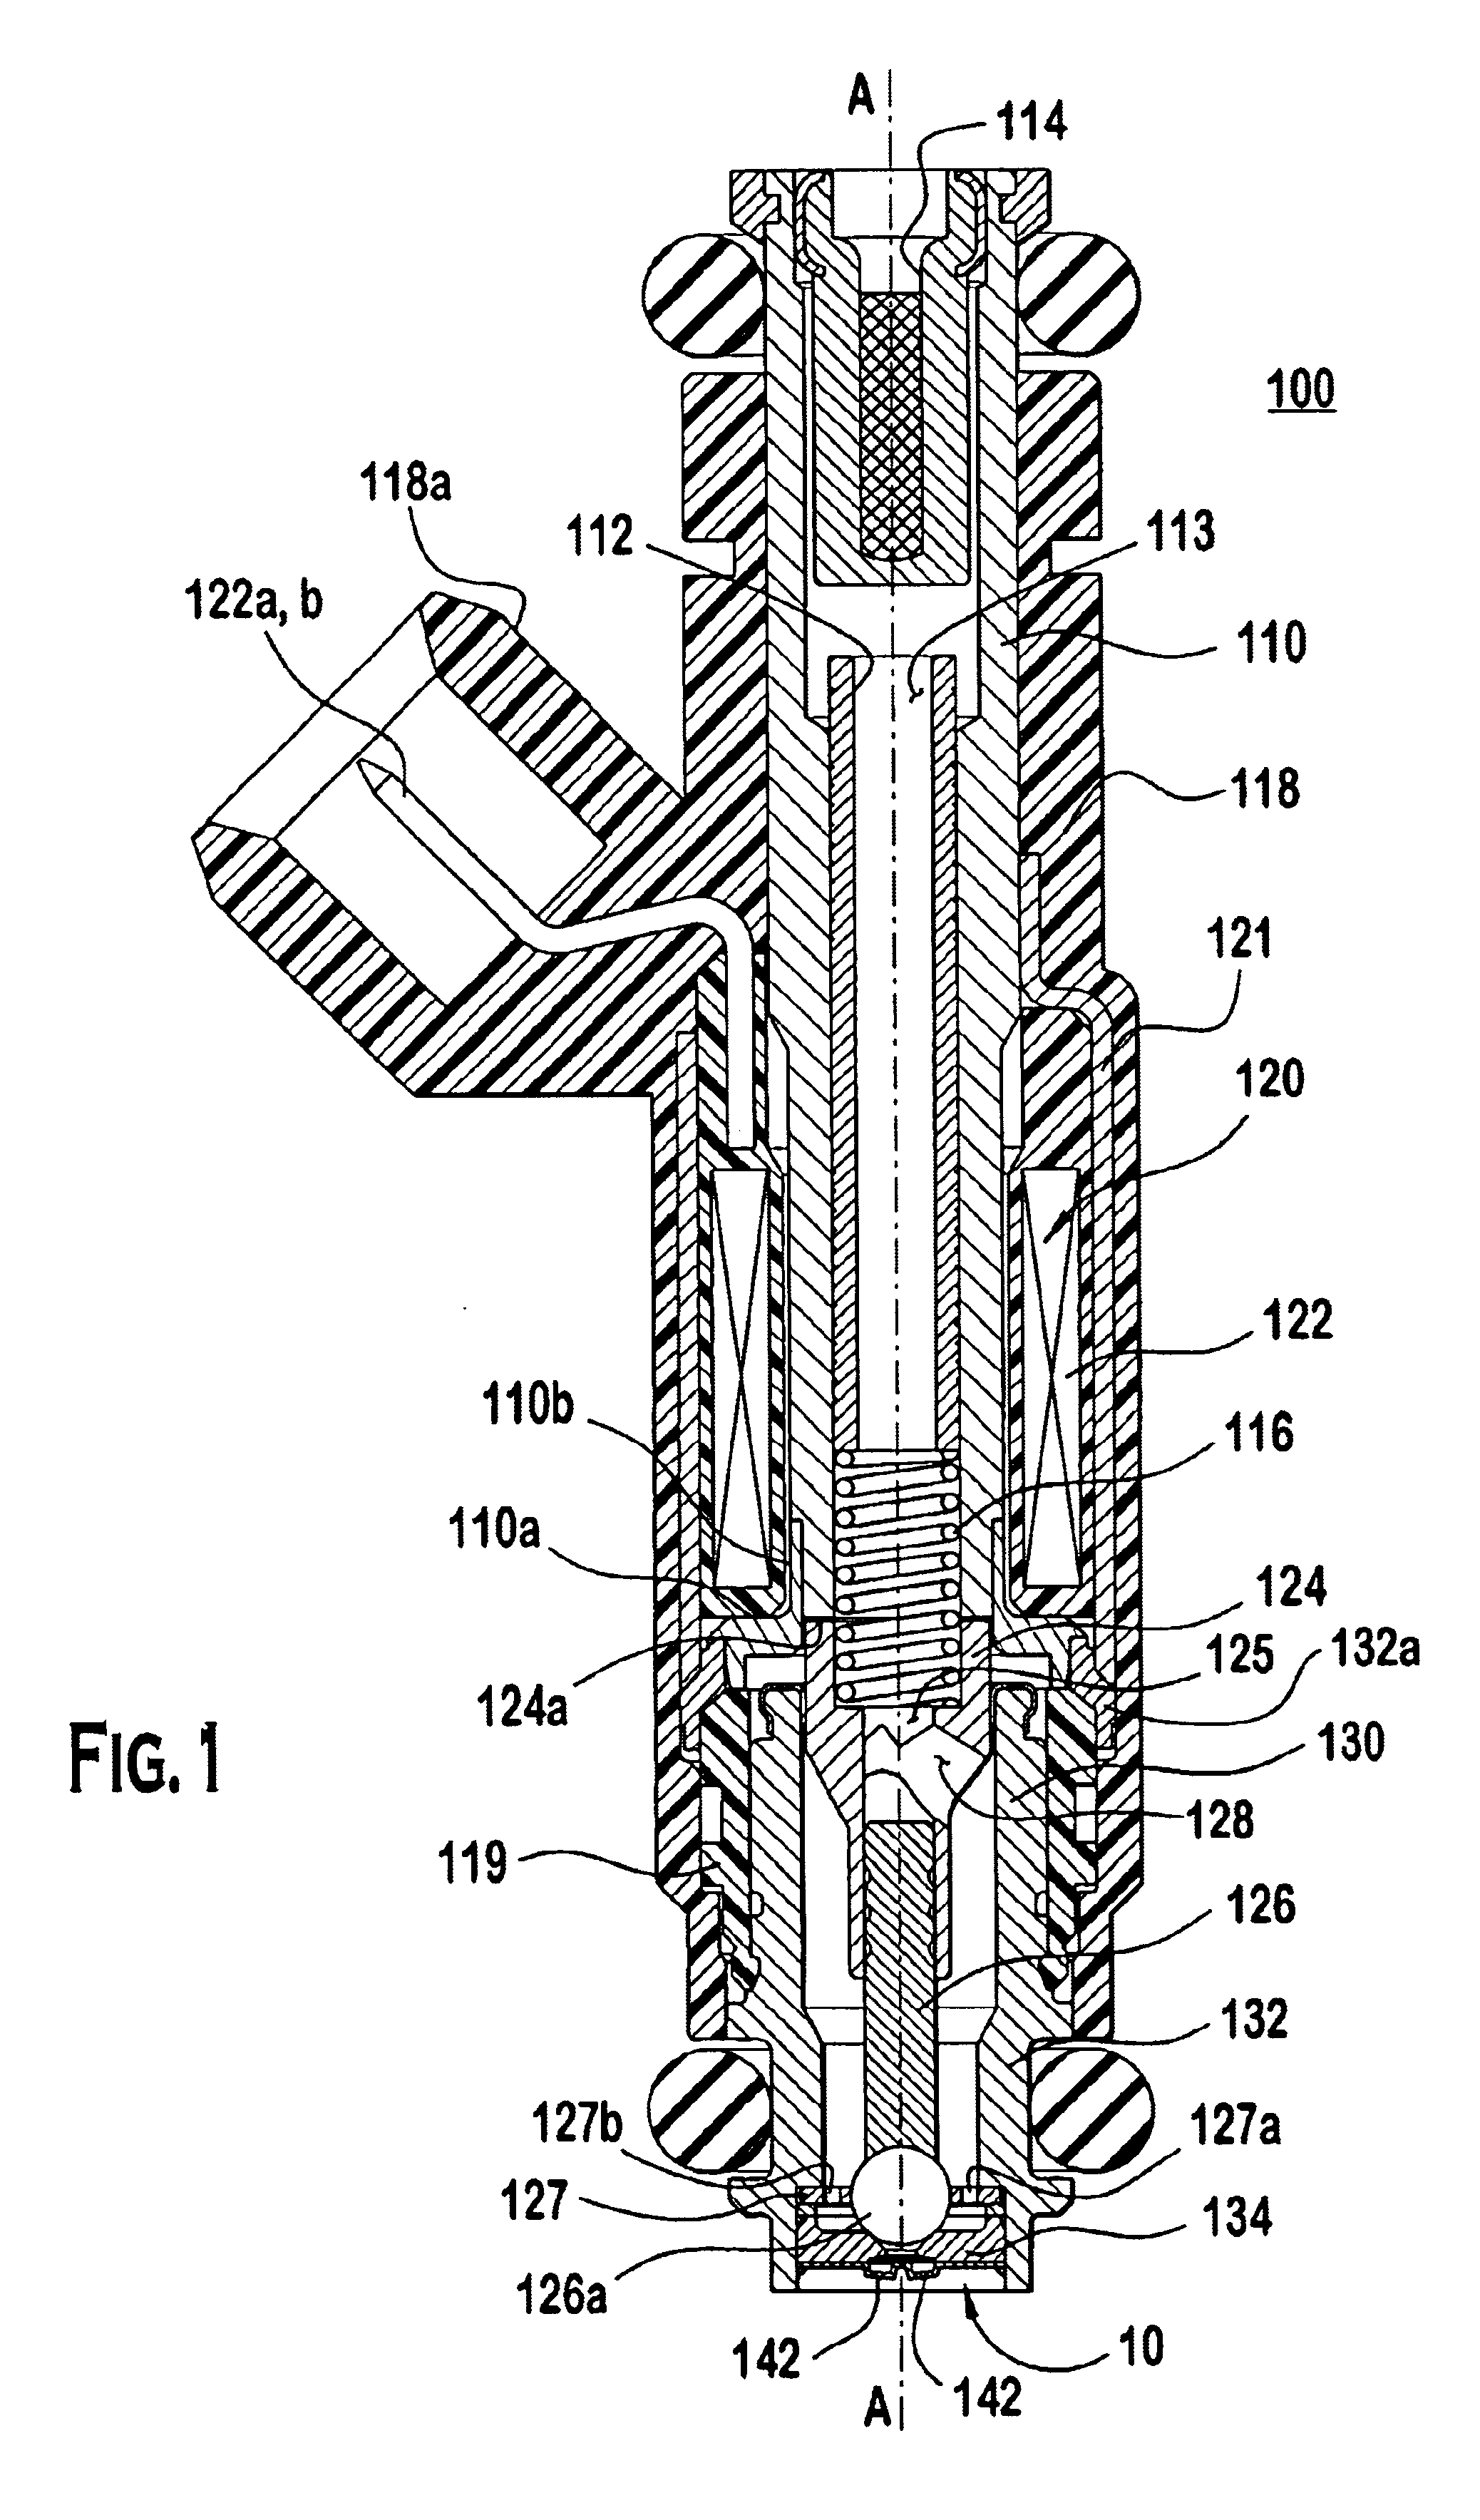 Spray pattern control with non-angled orifices formed on a generally planar metering disc and reoriented on subsequently dimpled fuel injection metering disc